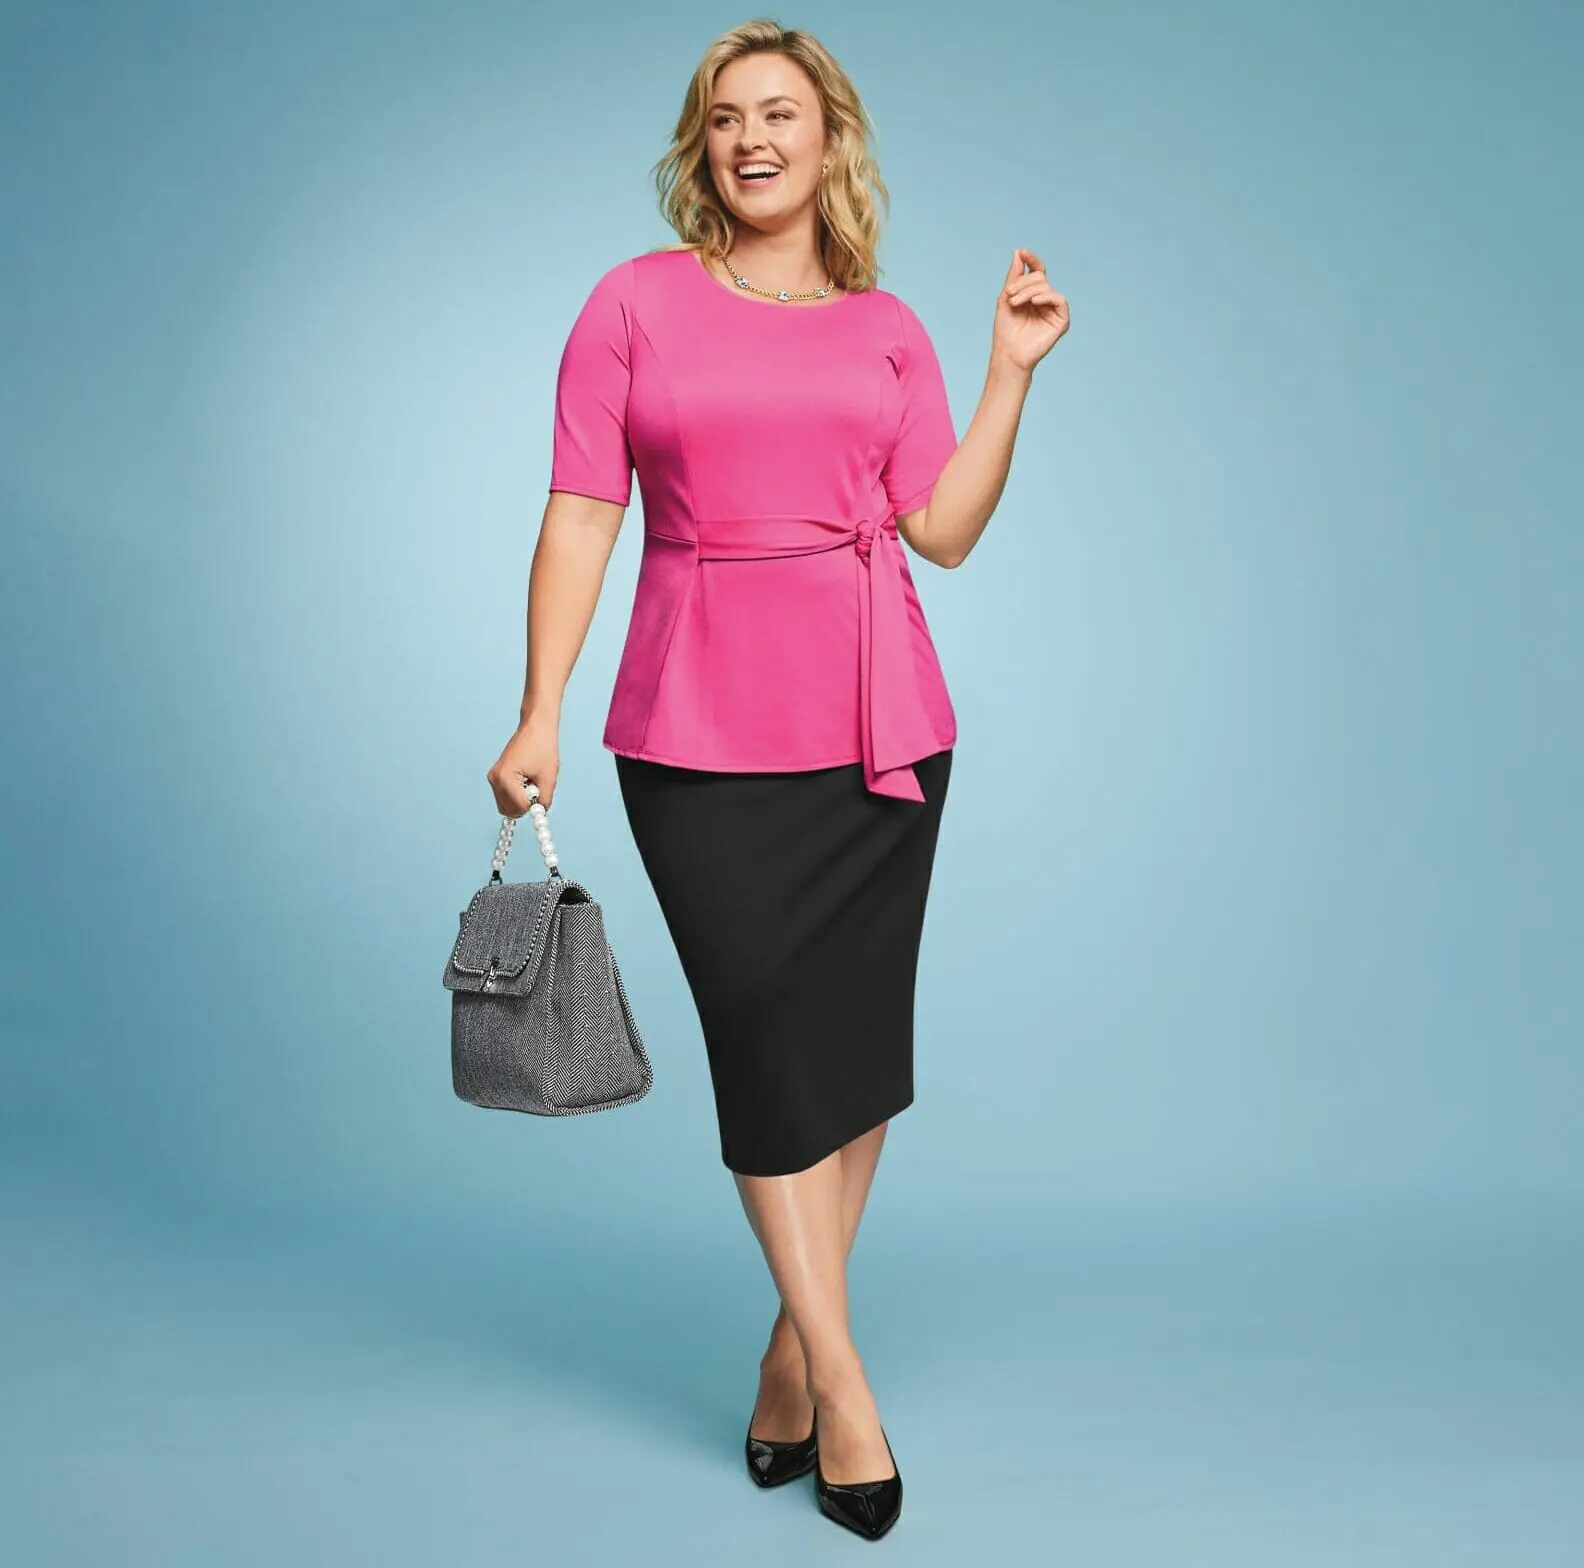 Plus-size Guide for Business Suits that Fit